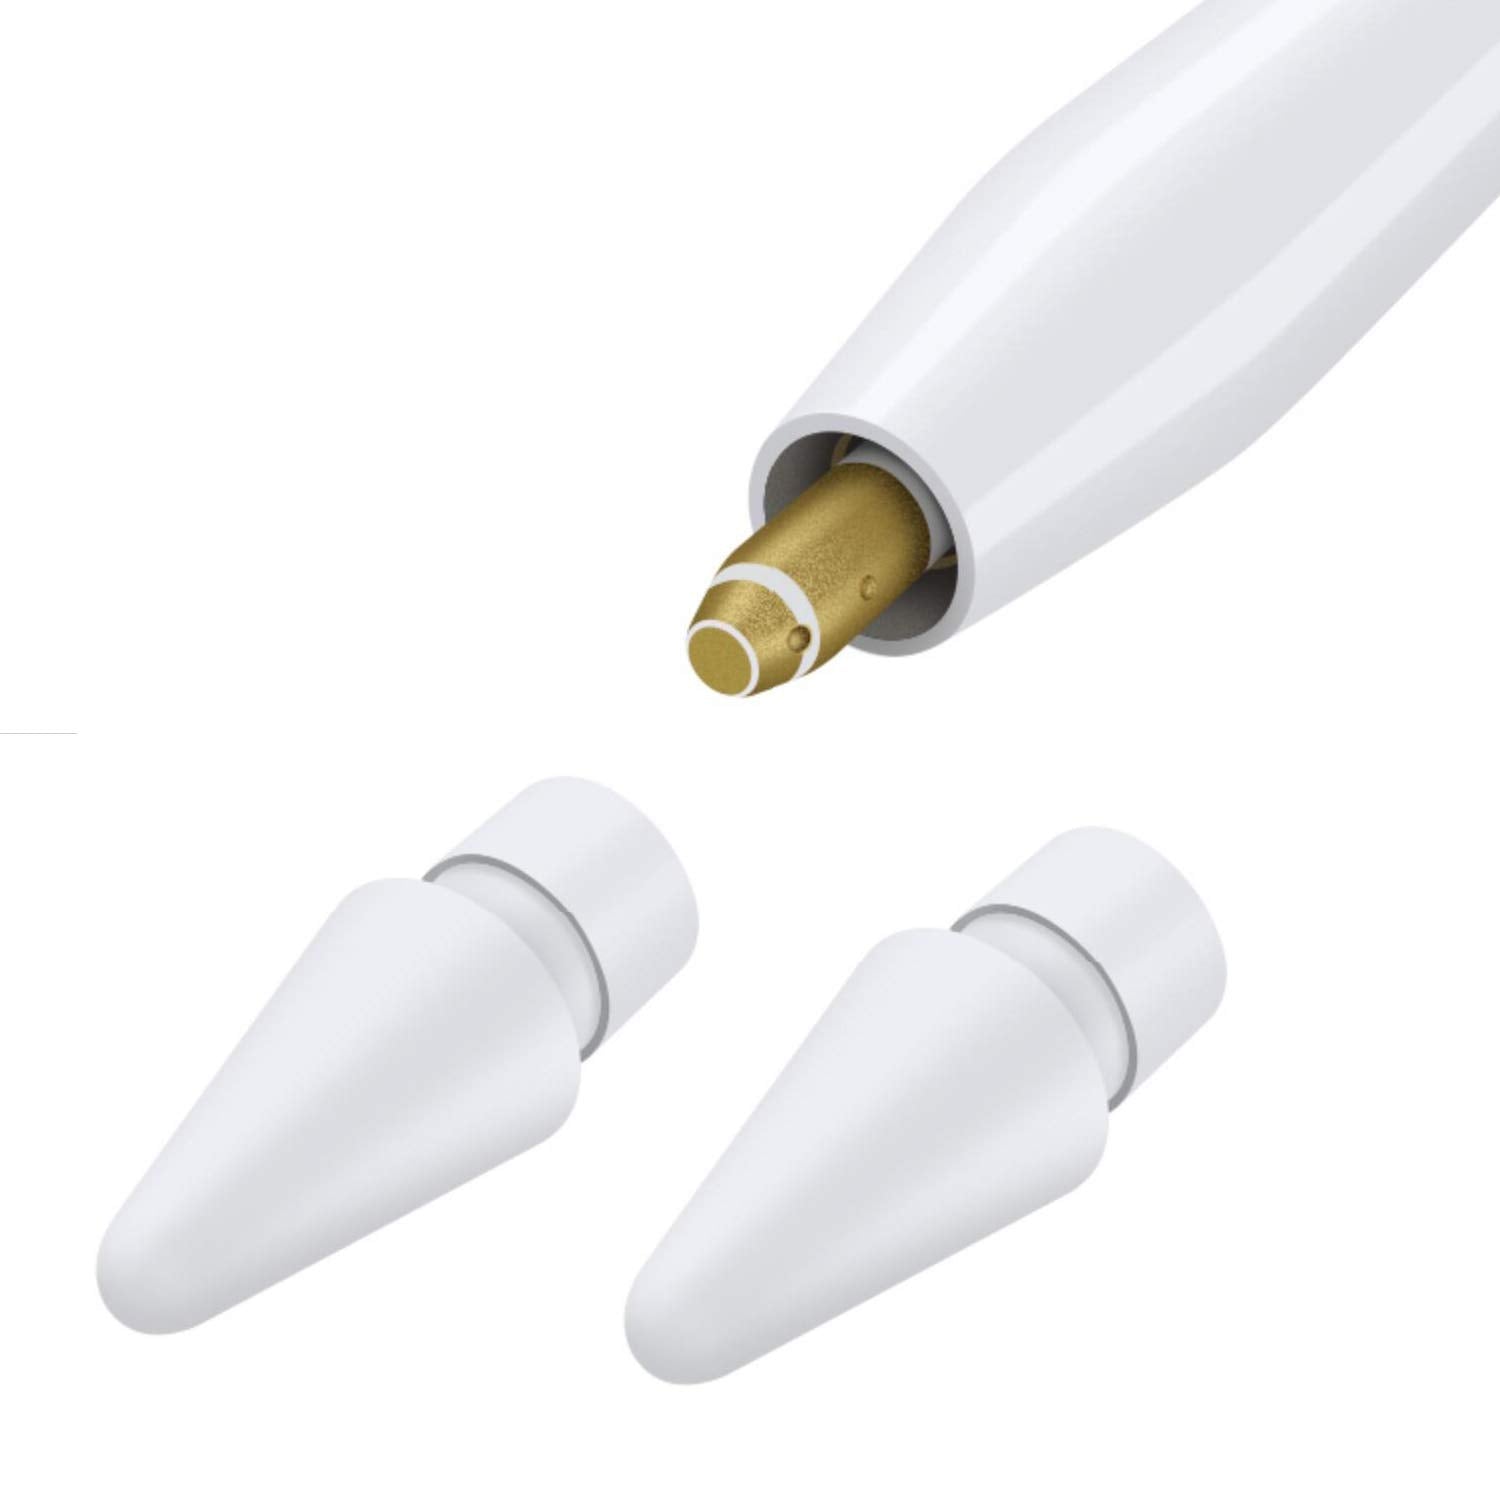 Apple Pencil Tips 1 Pack